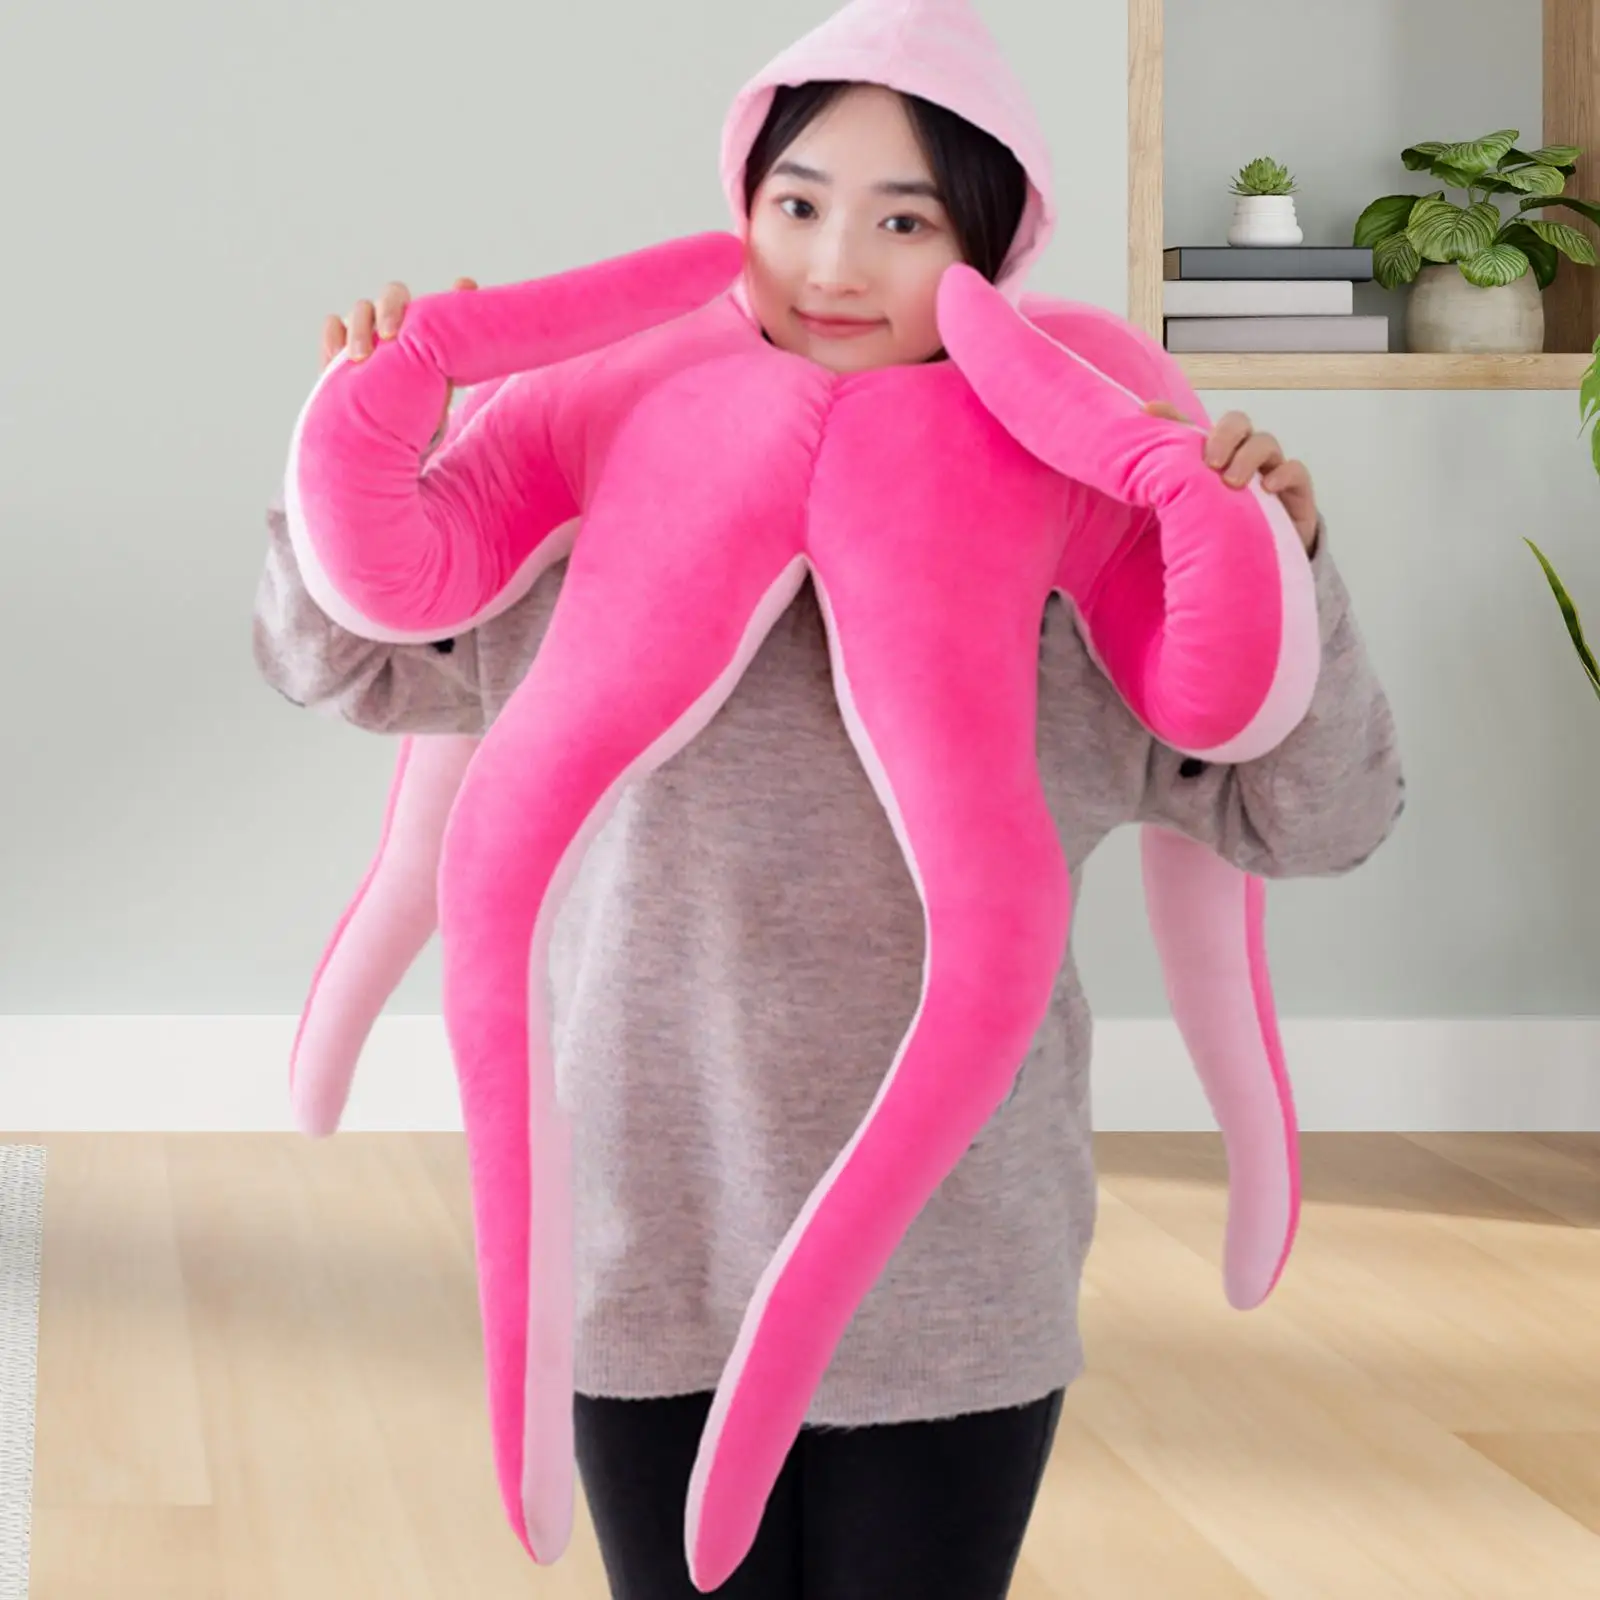 Baby Octopus Costume Wearable Sleeping Pillow Cosplay Hooded Large Octopus for Family Infants Adults Toddlers Role Playing Game